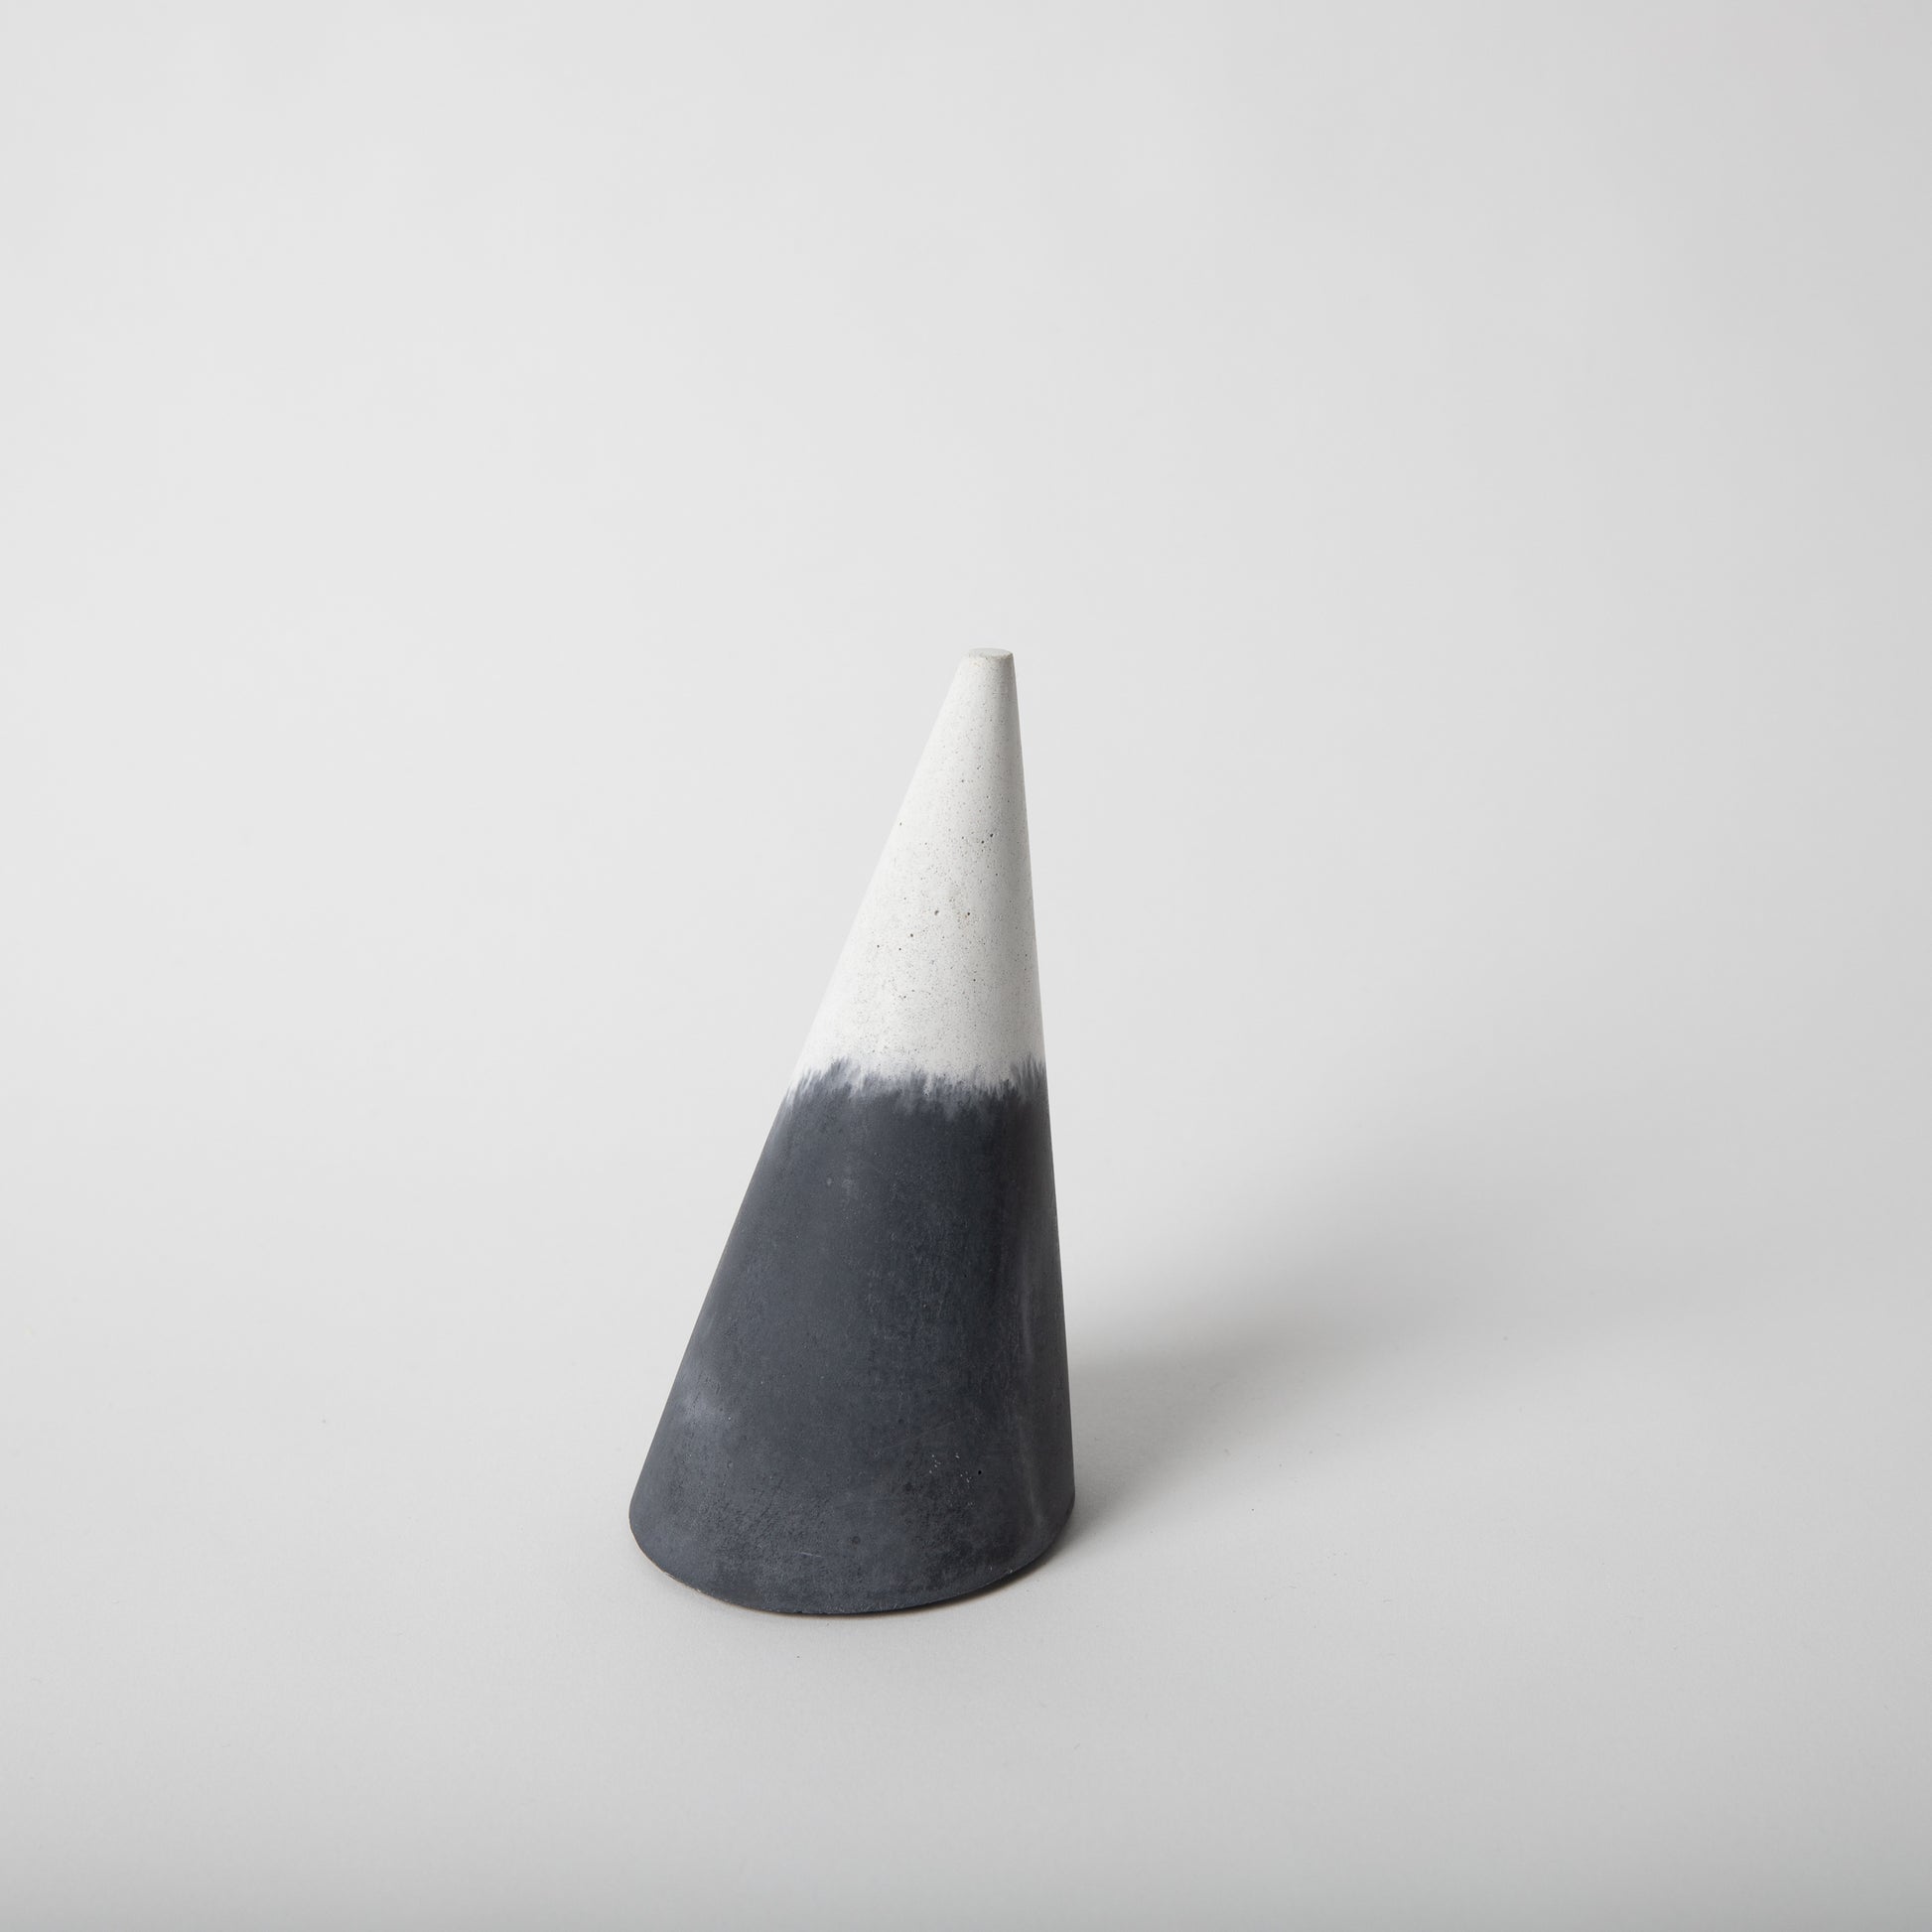 Cone shaped concrete bangle holder with cork base in black and white.